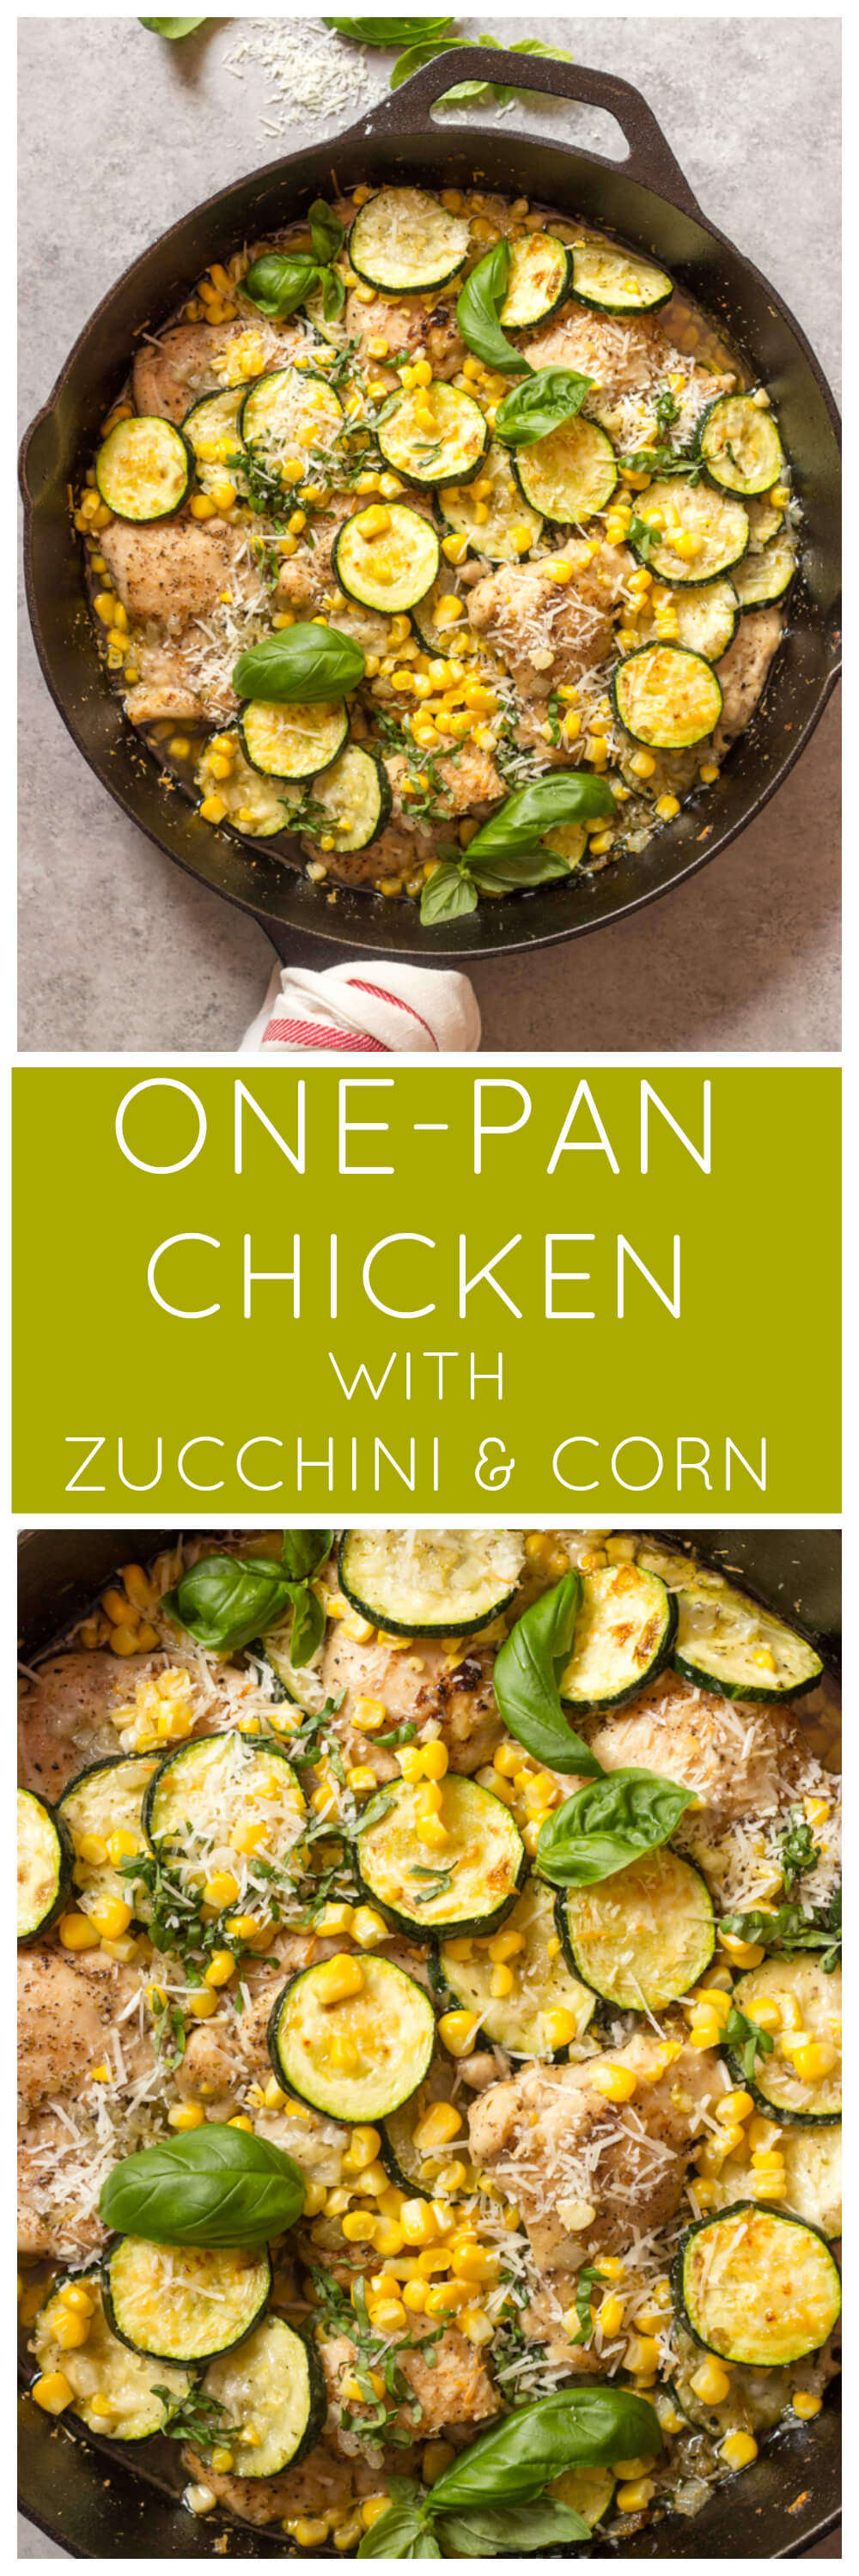 One-Pan Chicken with Zucchini and Corn - Little Broken